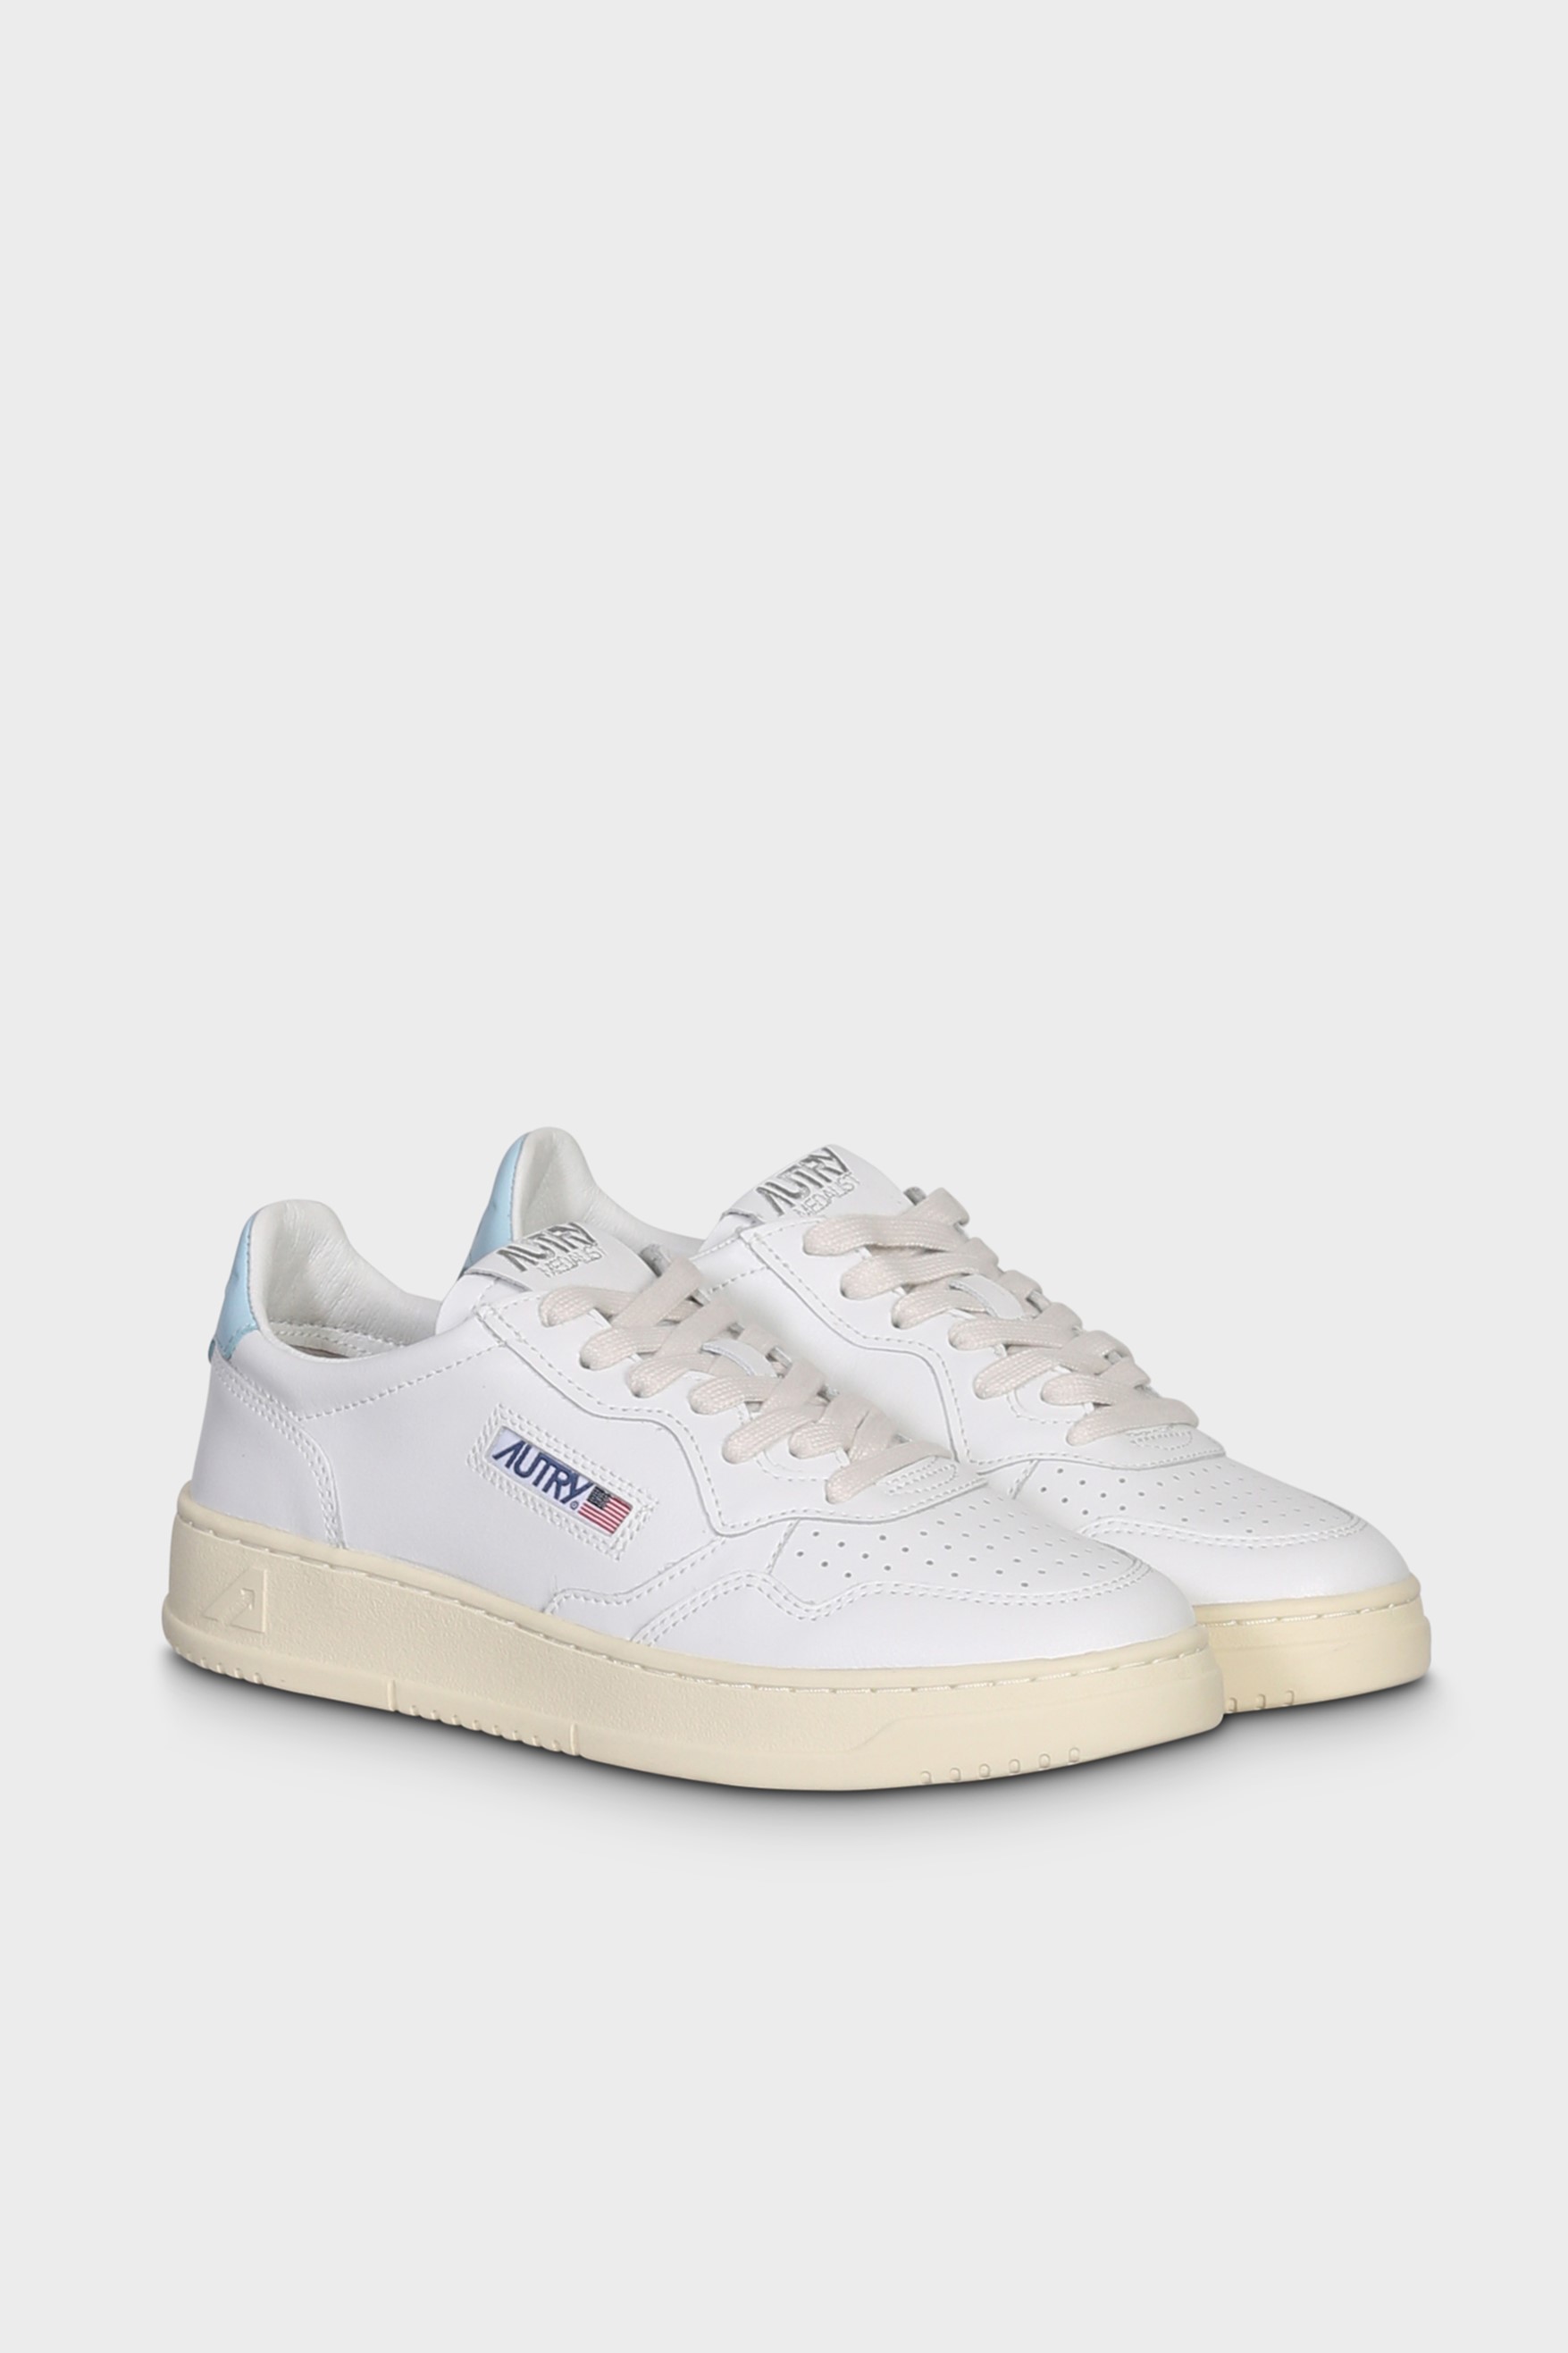 AUTRY ACTION SHOES Sneaker Low in White/Stream Blue 35